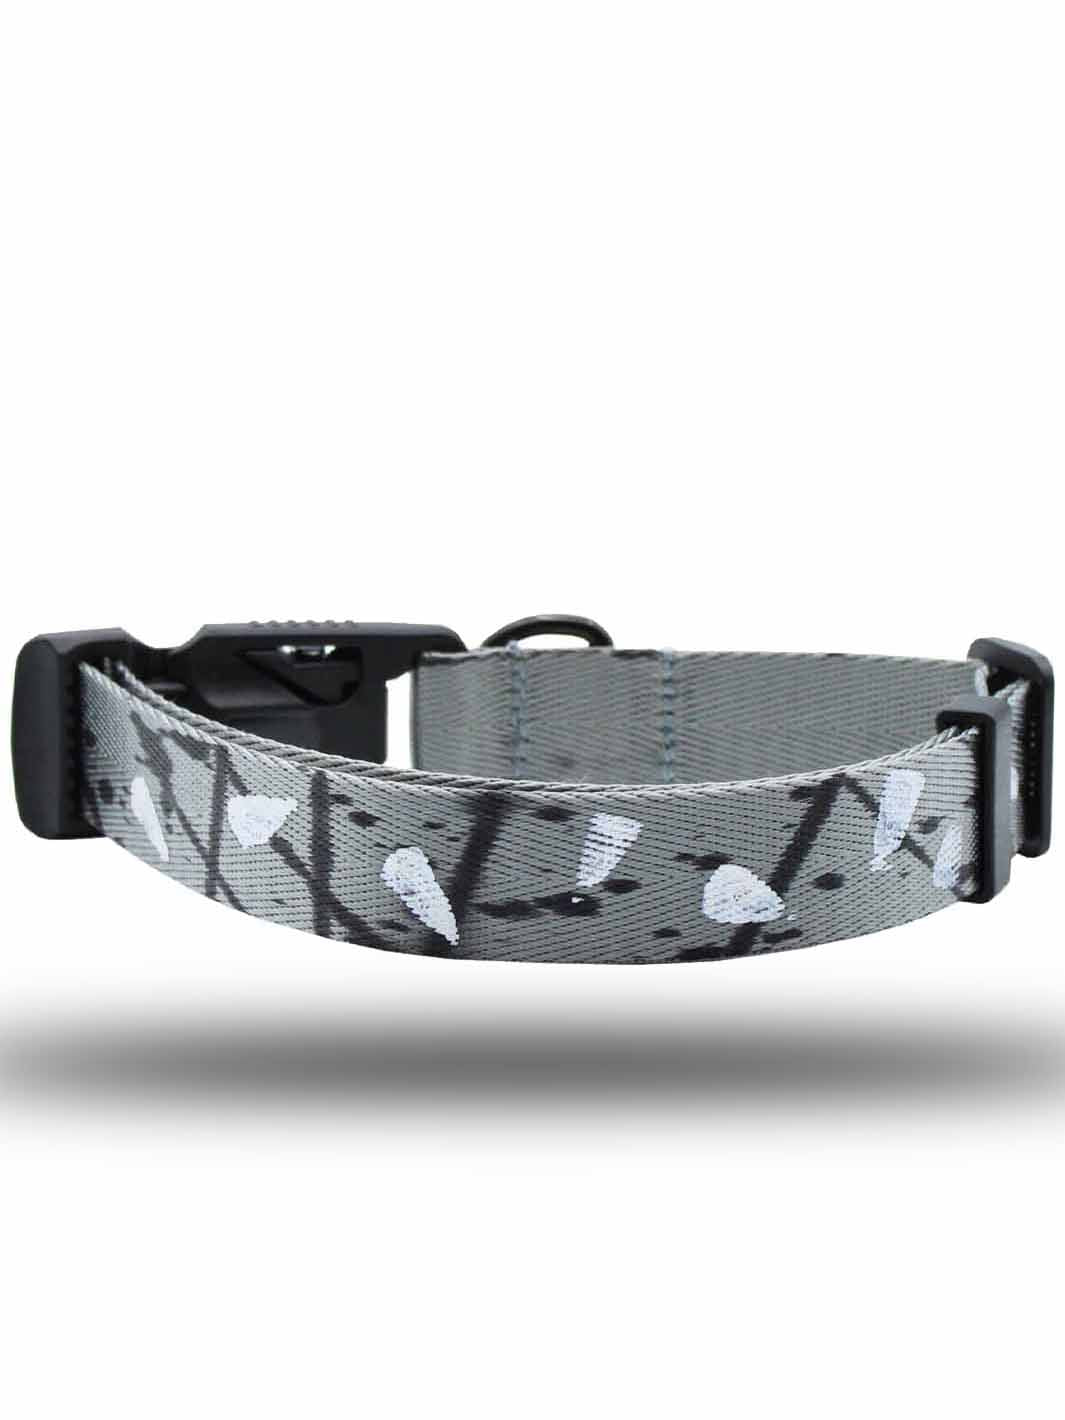 The reverse side of a MAGNUS Canis silver printed pattern strap dog collar with a magnetic buckle laying horizontally.